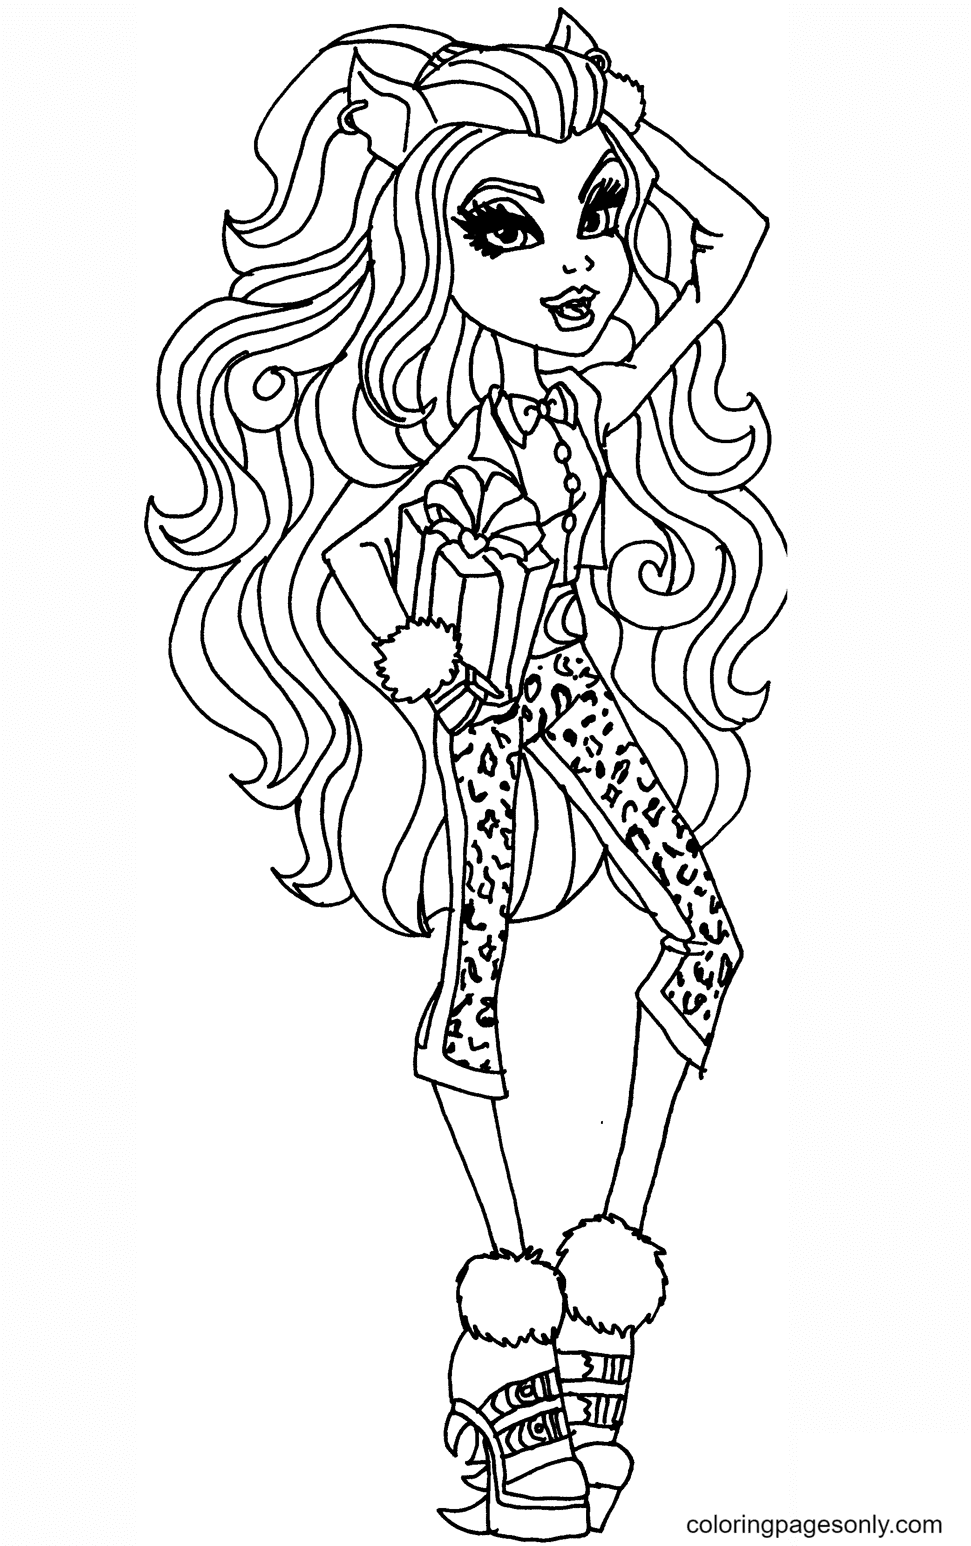 Monster High Coloring Pages Printable for Free Download